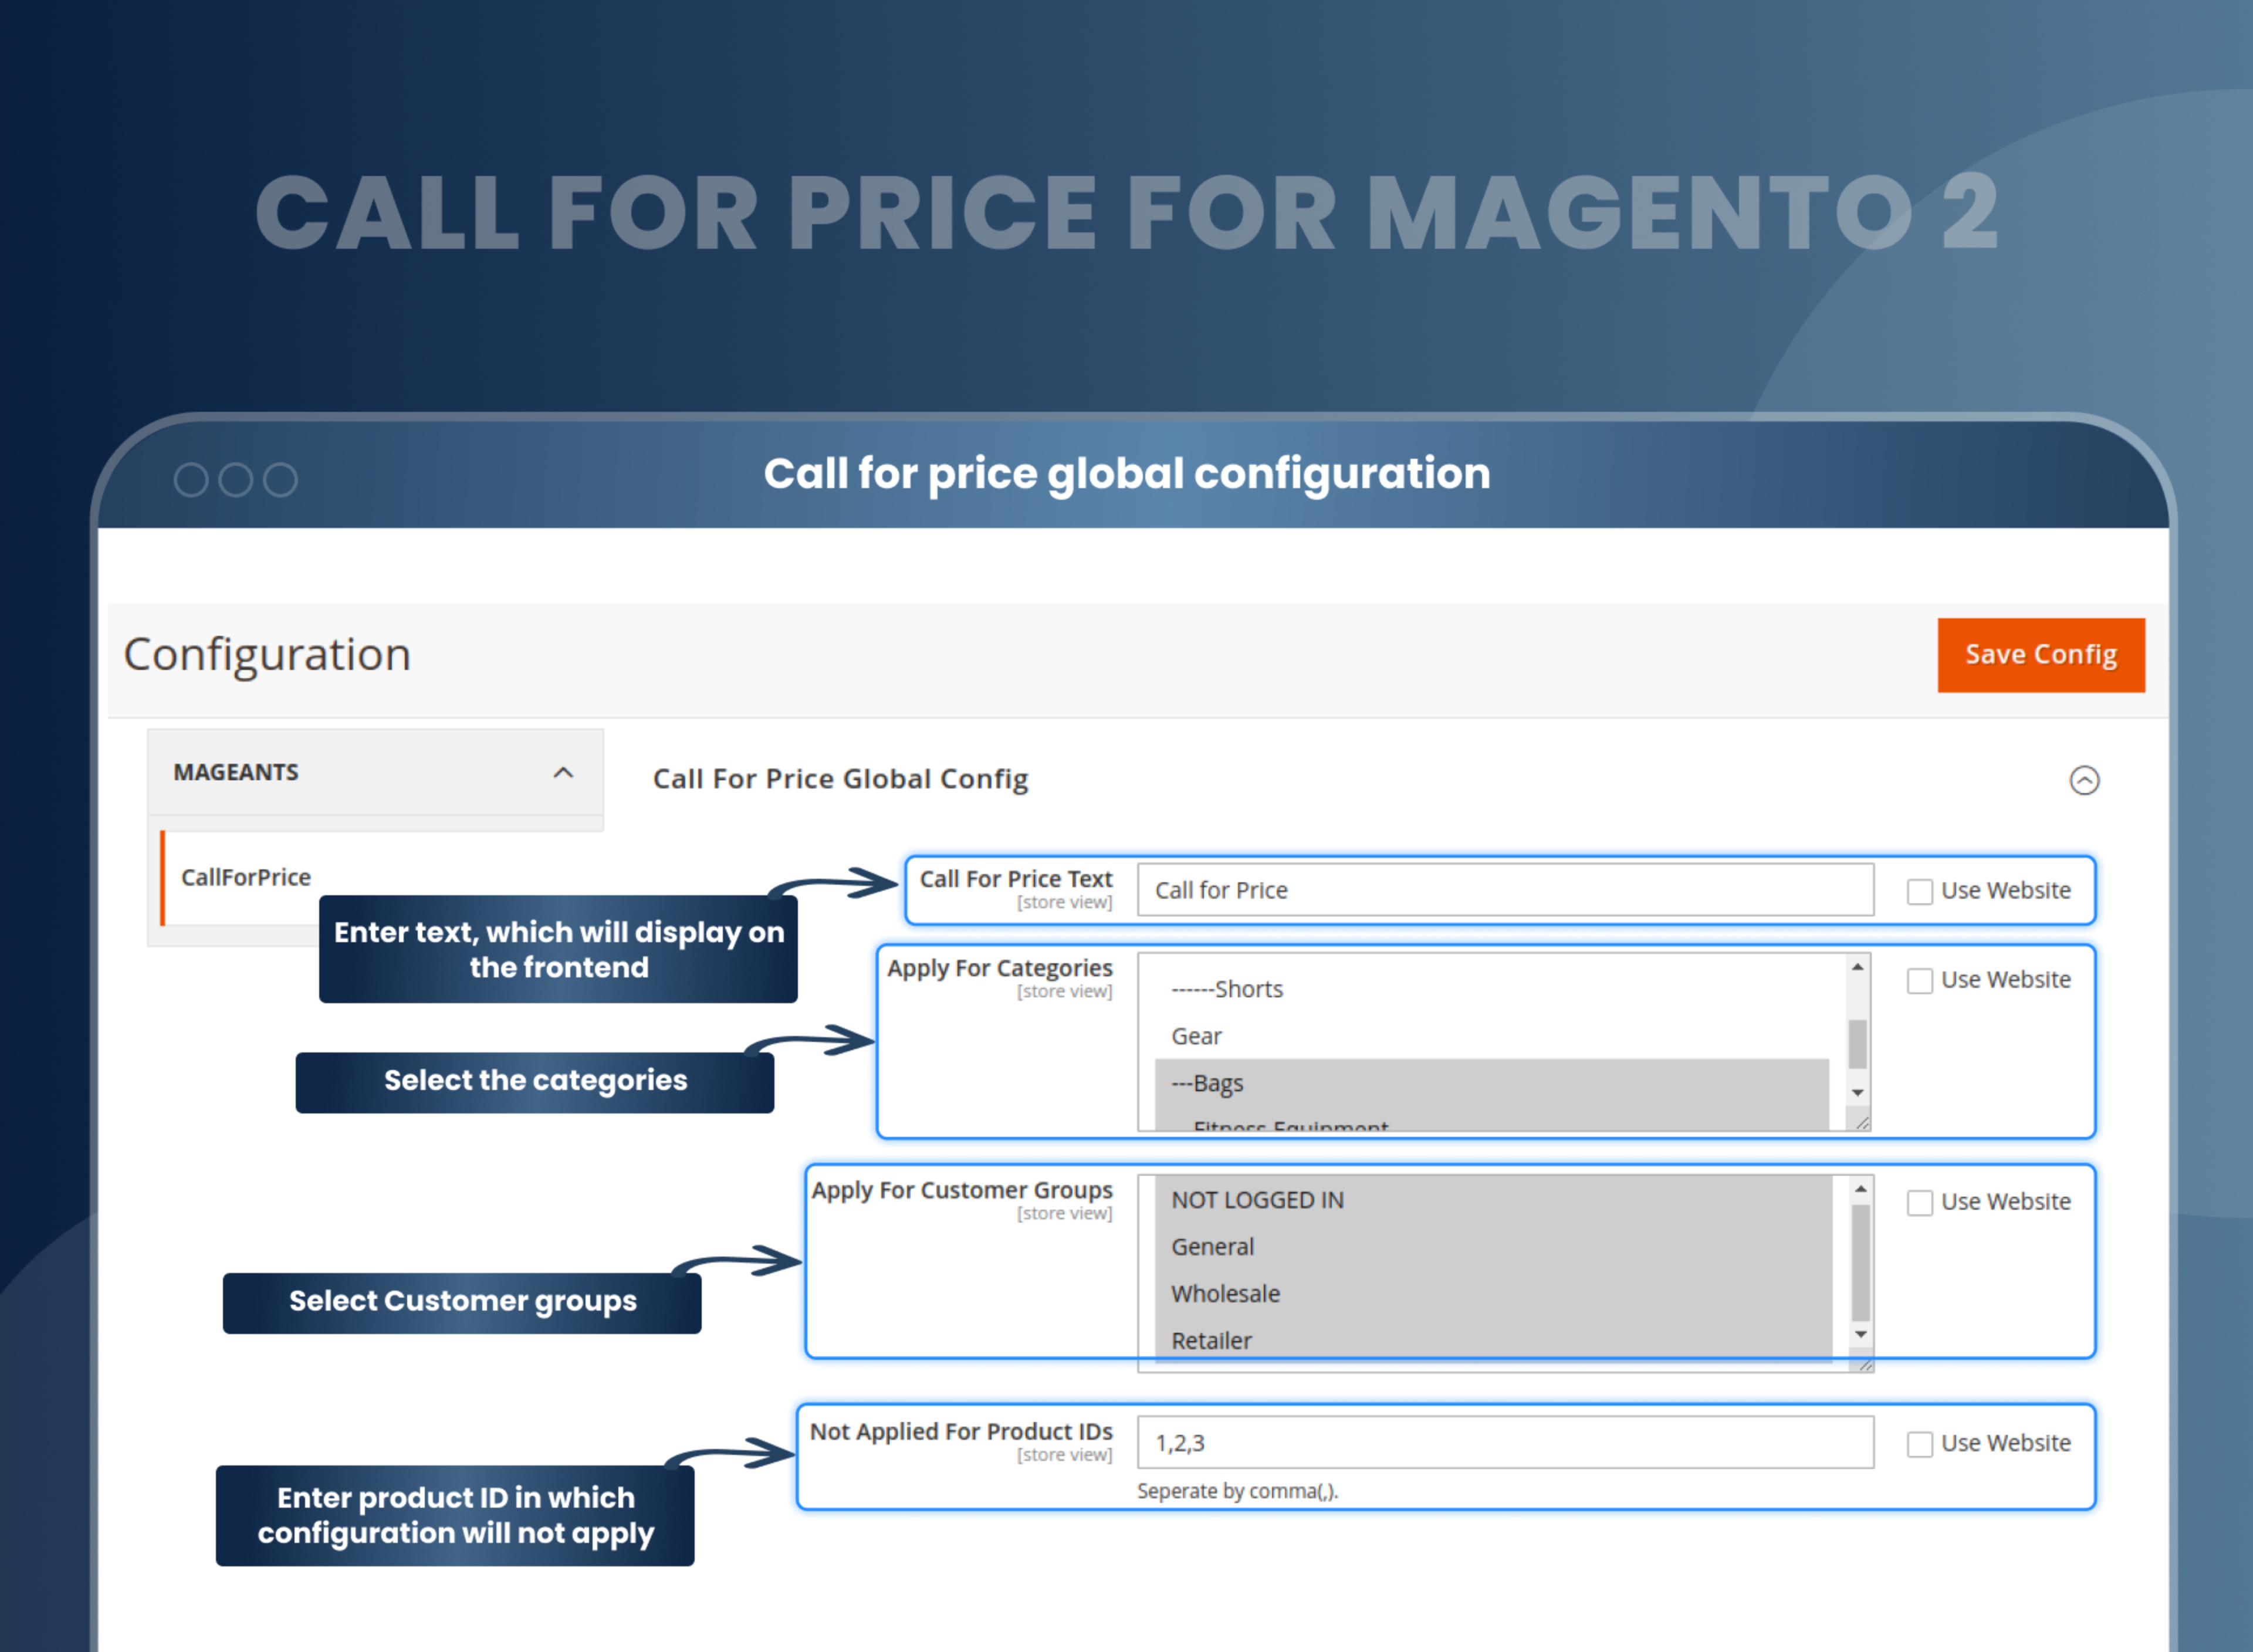 Call for price global configuration